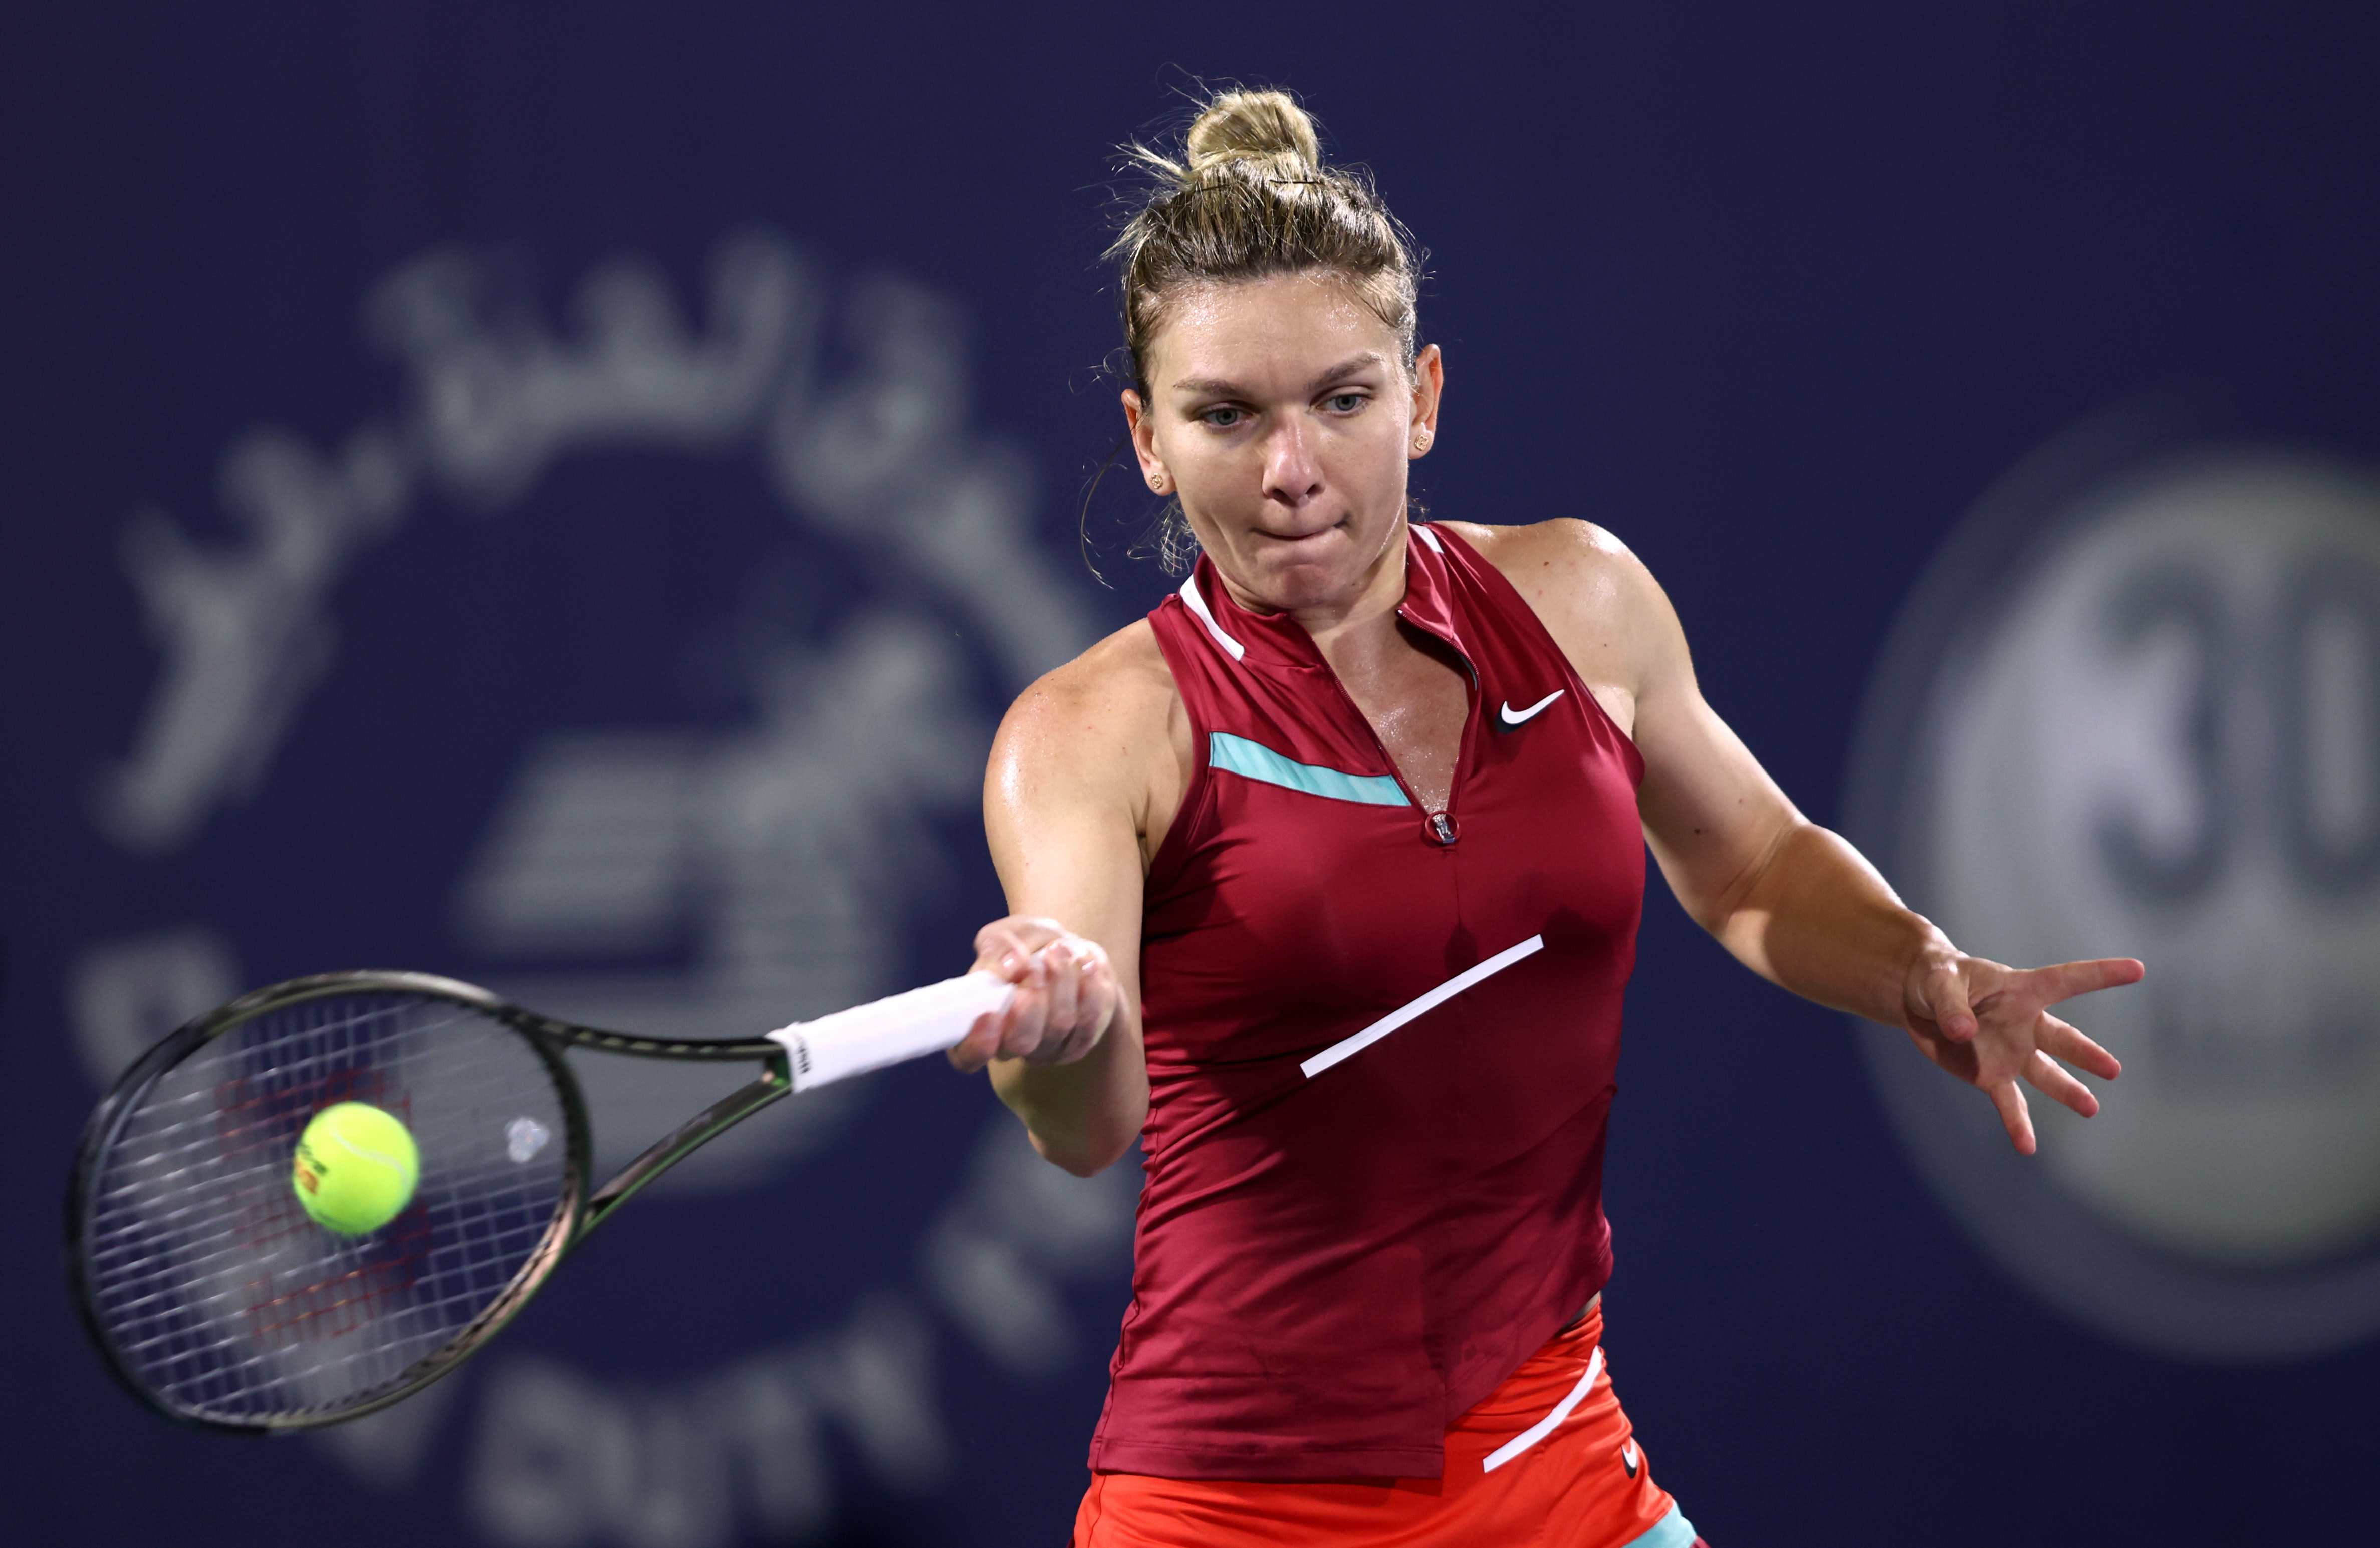 Tennis: Halep rewarded for patience after risky start